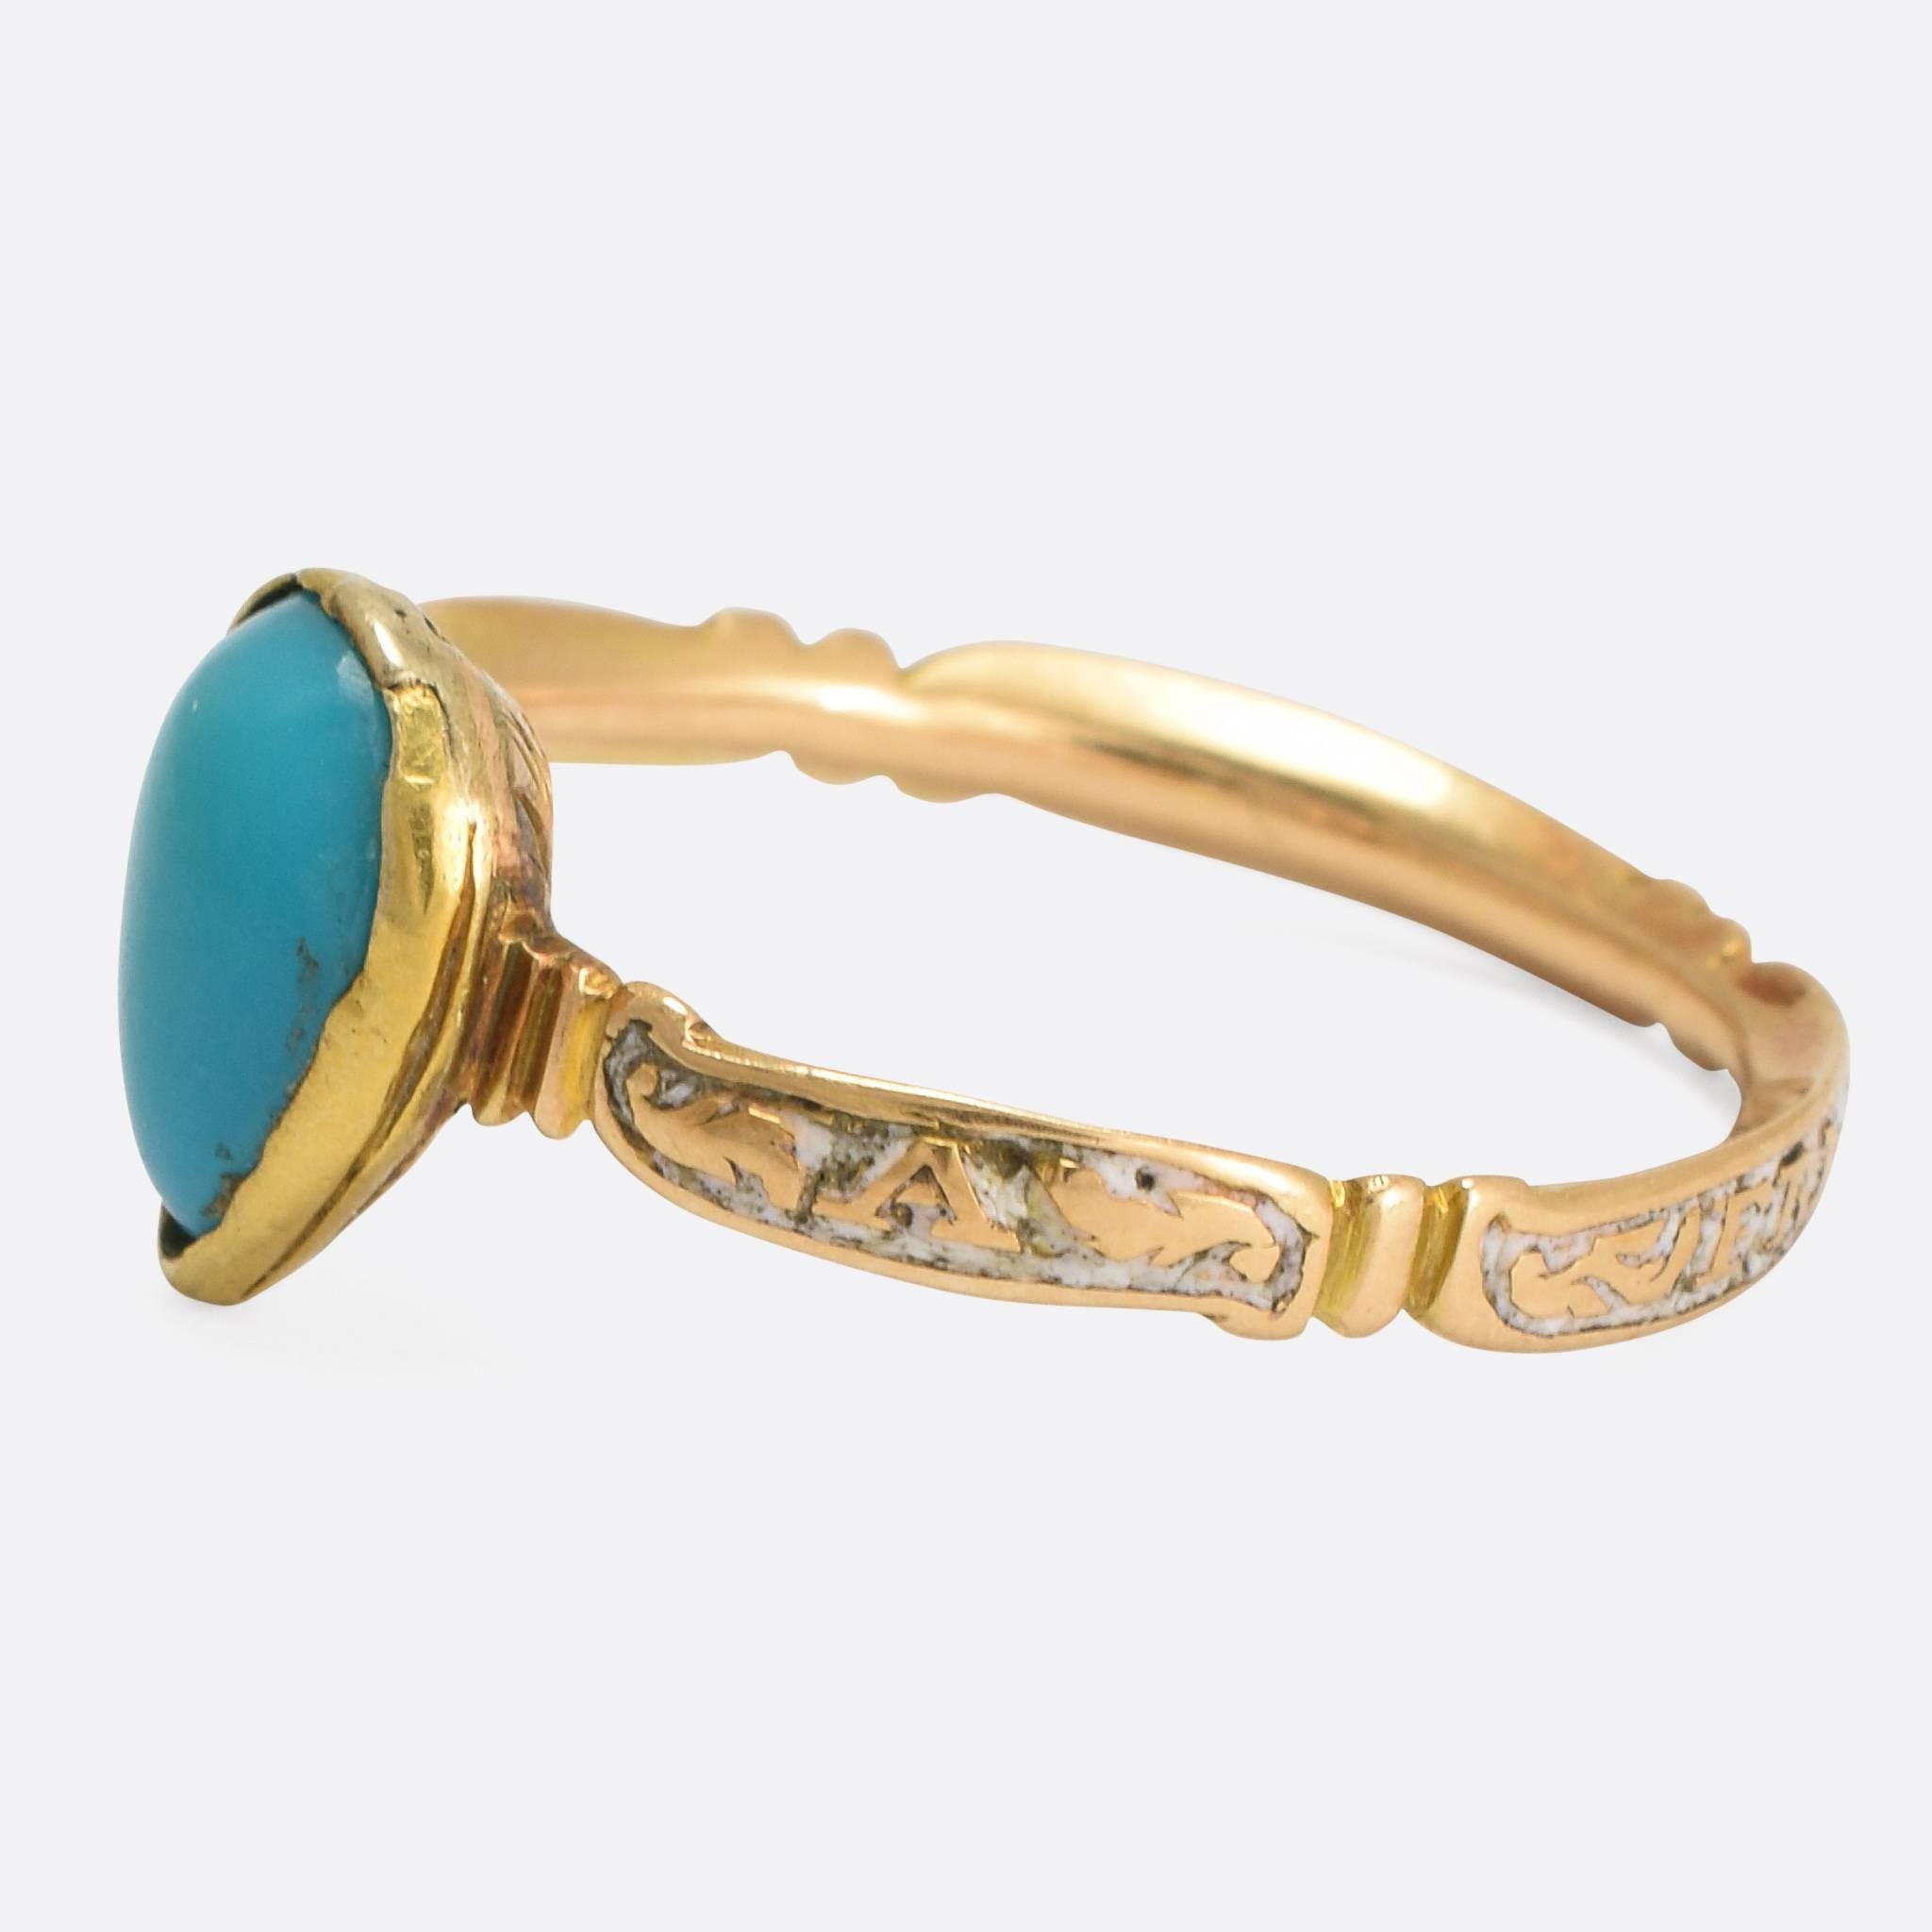 A most unusual 18th Century sentimental ring, the white enamelled rococo style band with the words 'A Friend's Heart'. The head is set with a natural heart shaped turquoise cabochon, and the back features the fine fluted detail associated with the